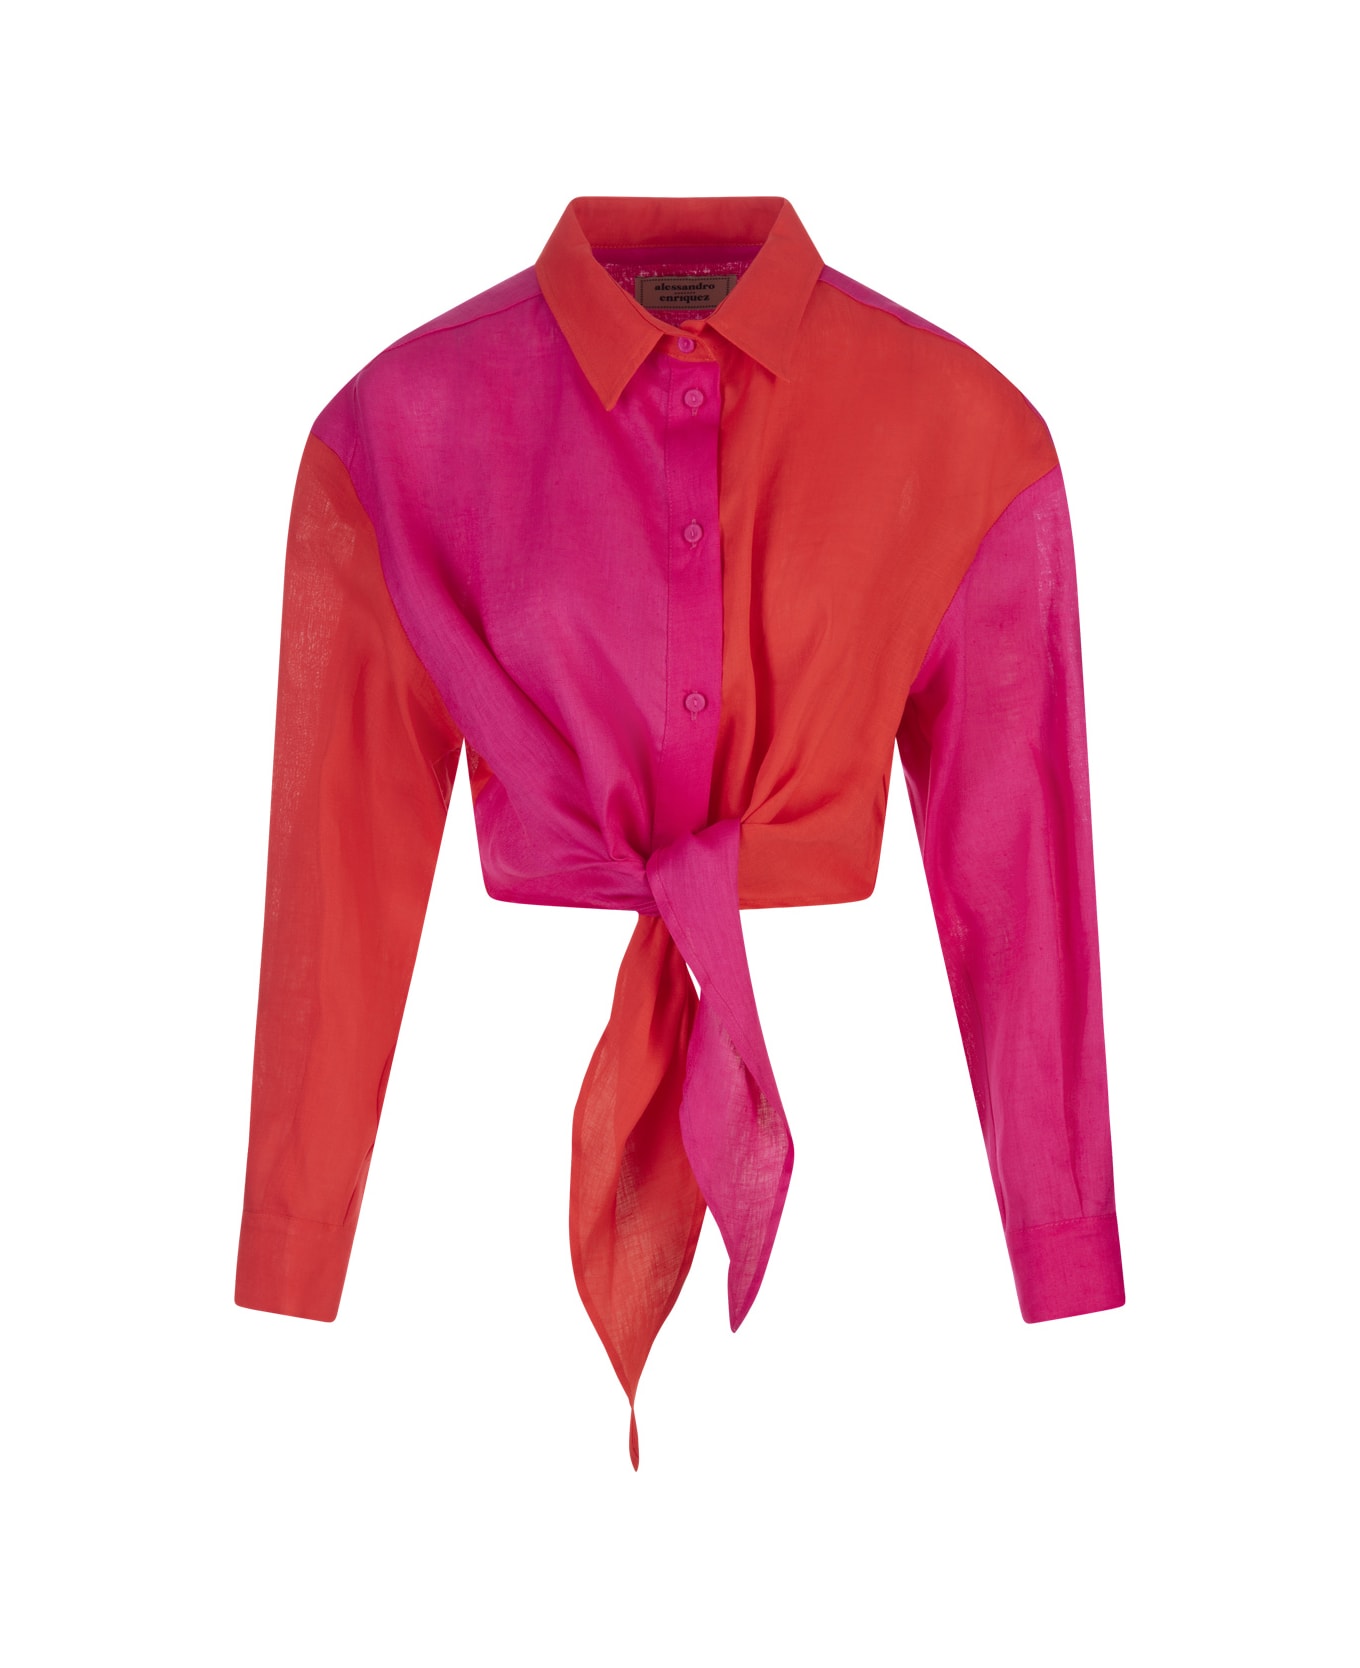 Alessandro Enriquez Red And Fuchsia Short Shirt With Knot - Red